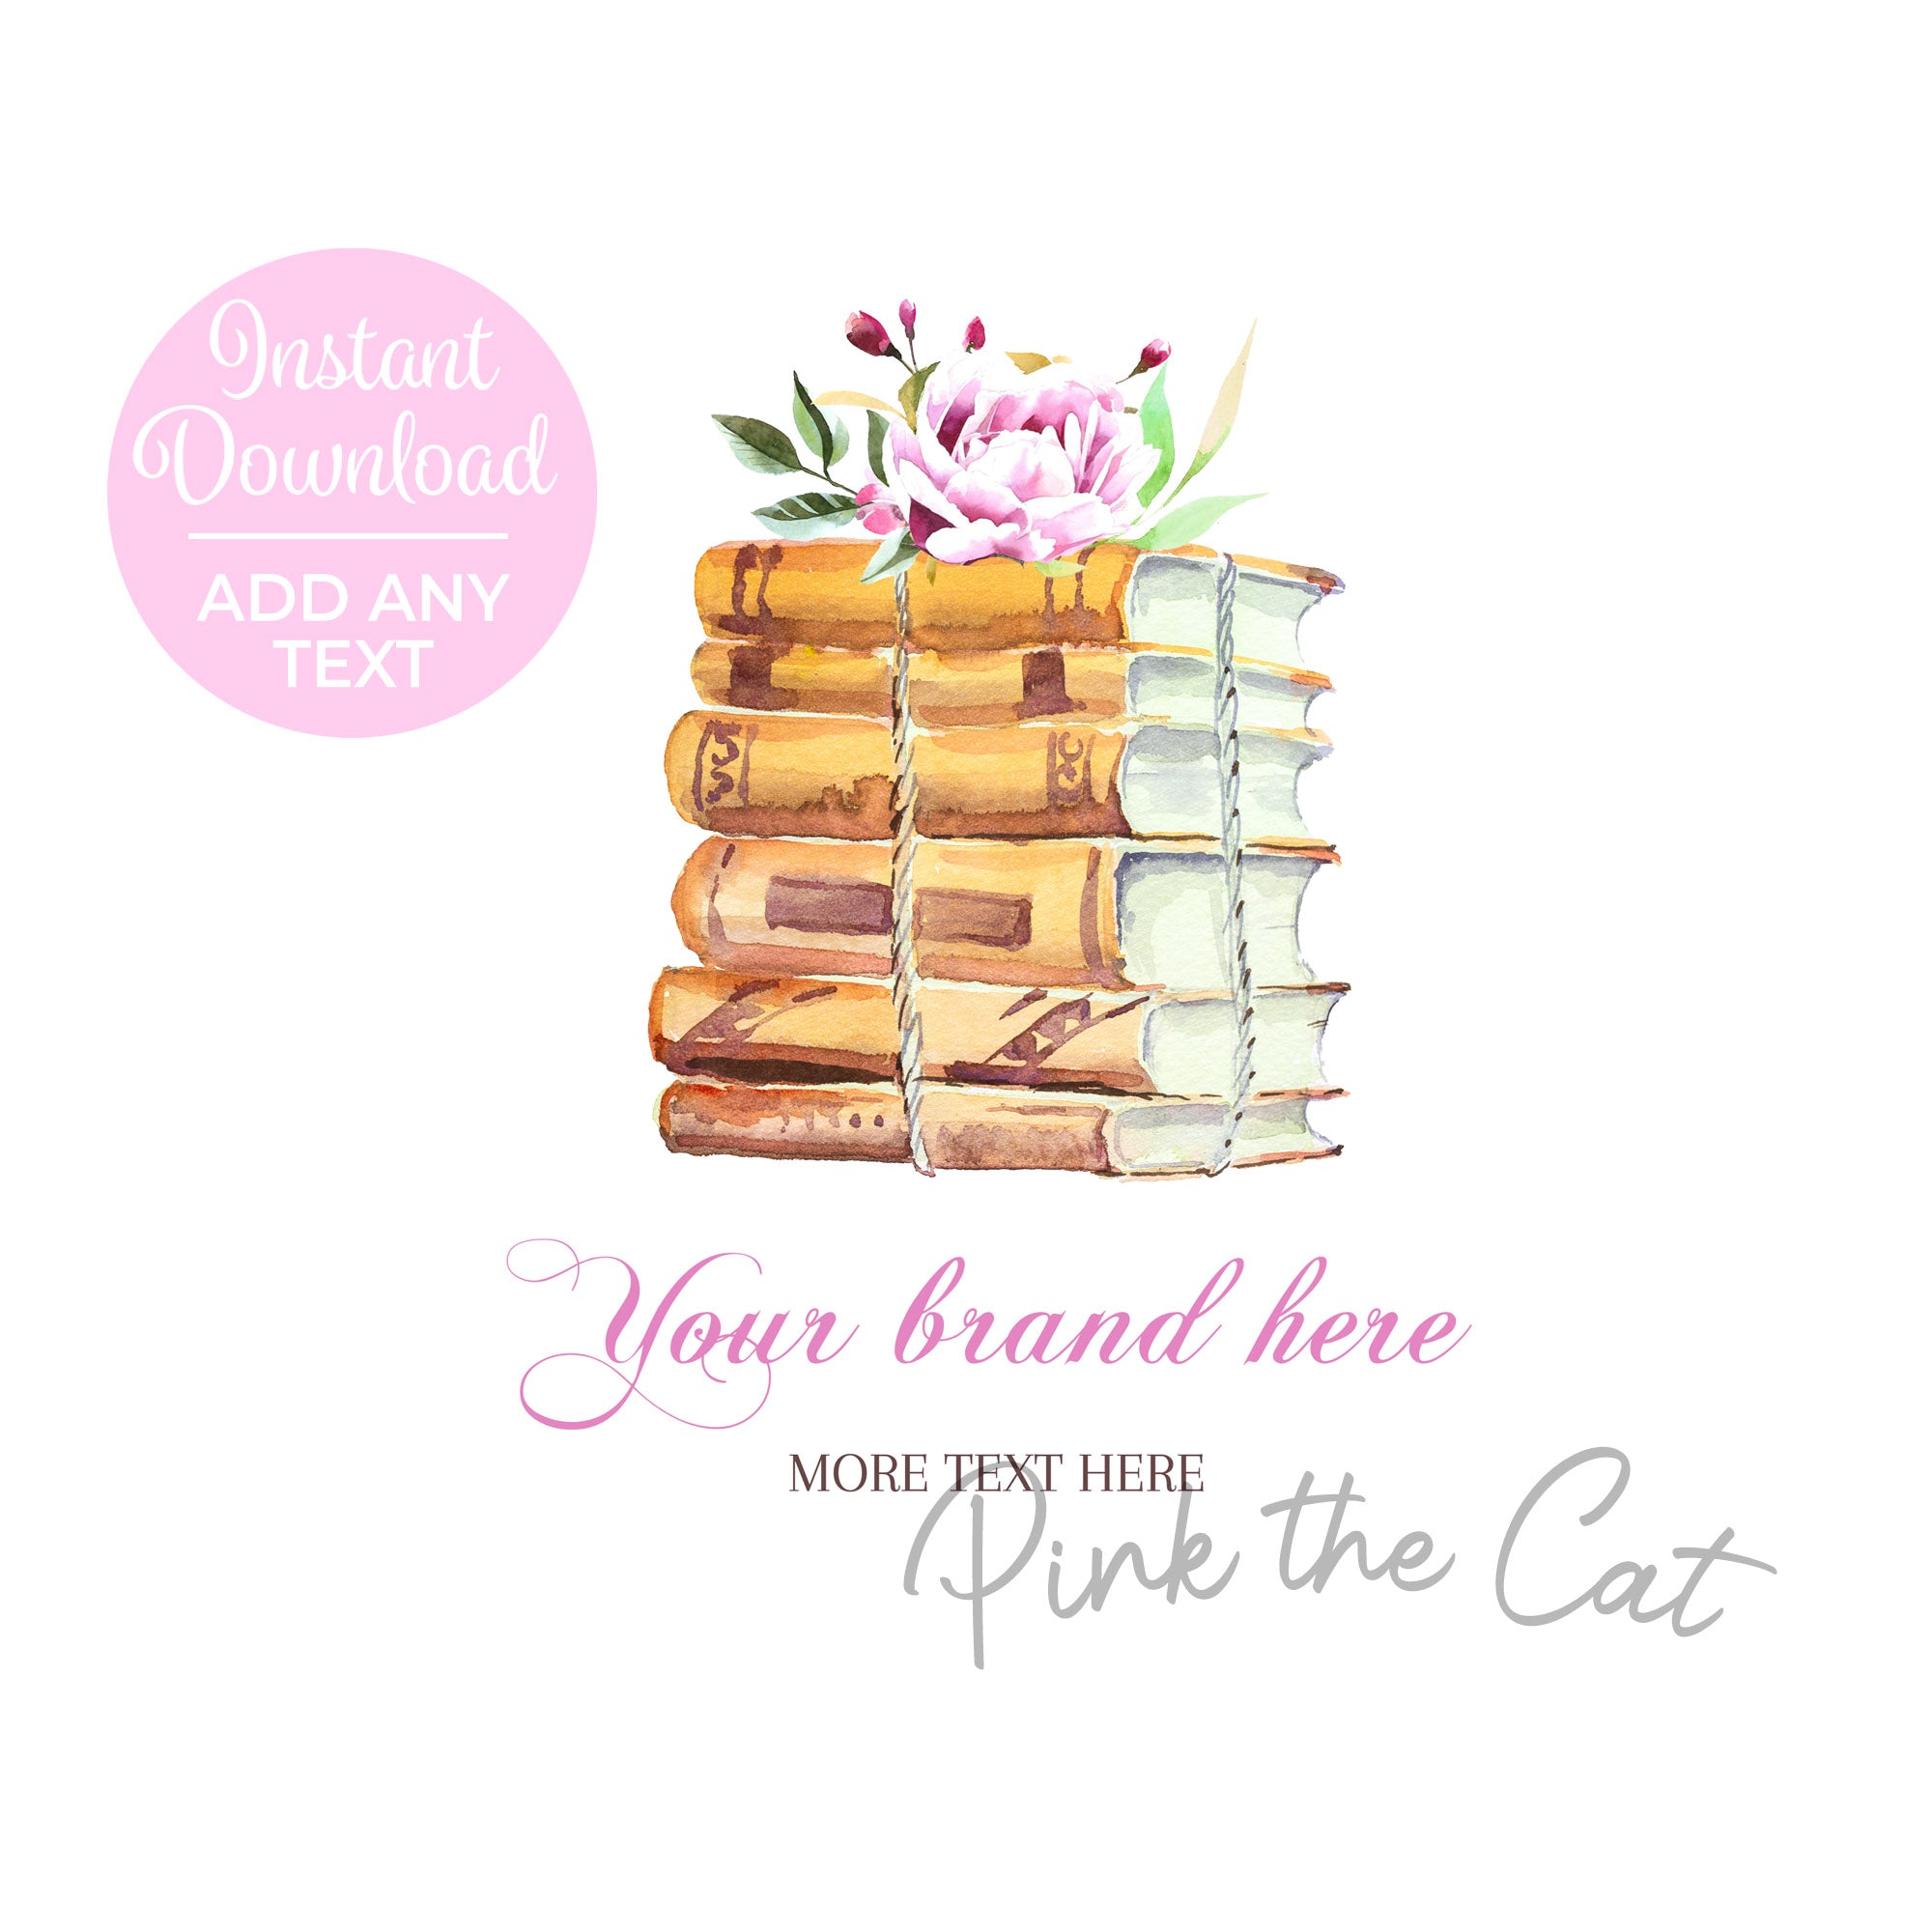 Watercolor Book Stack Stock Illustration - Download Image Now